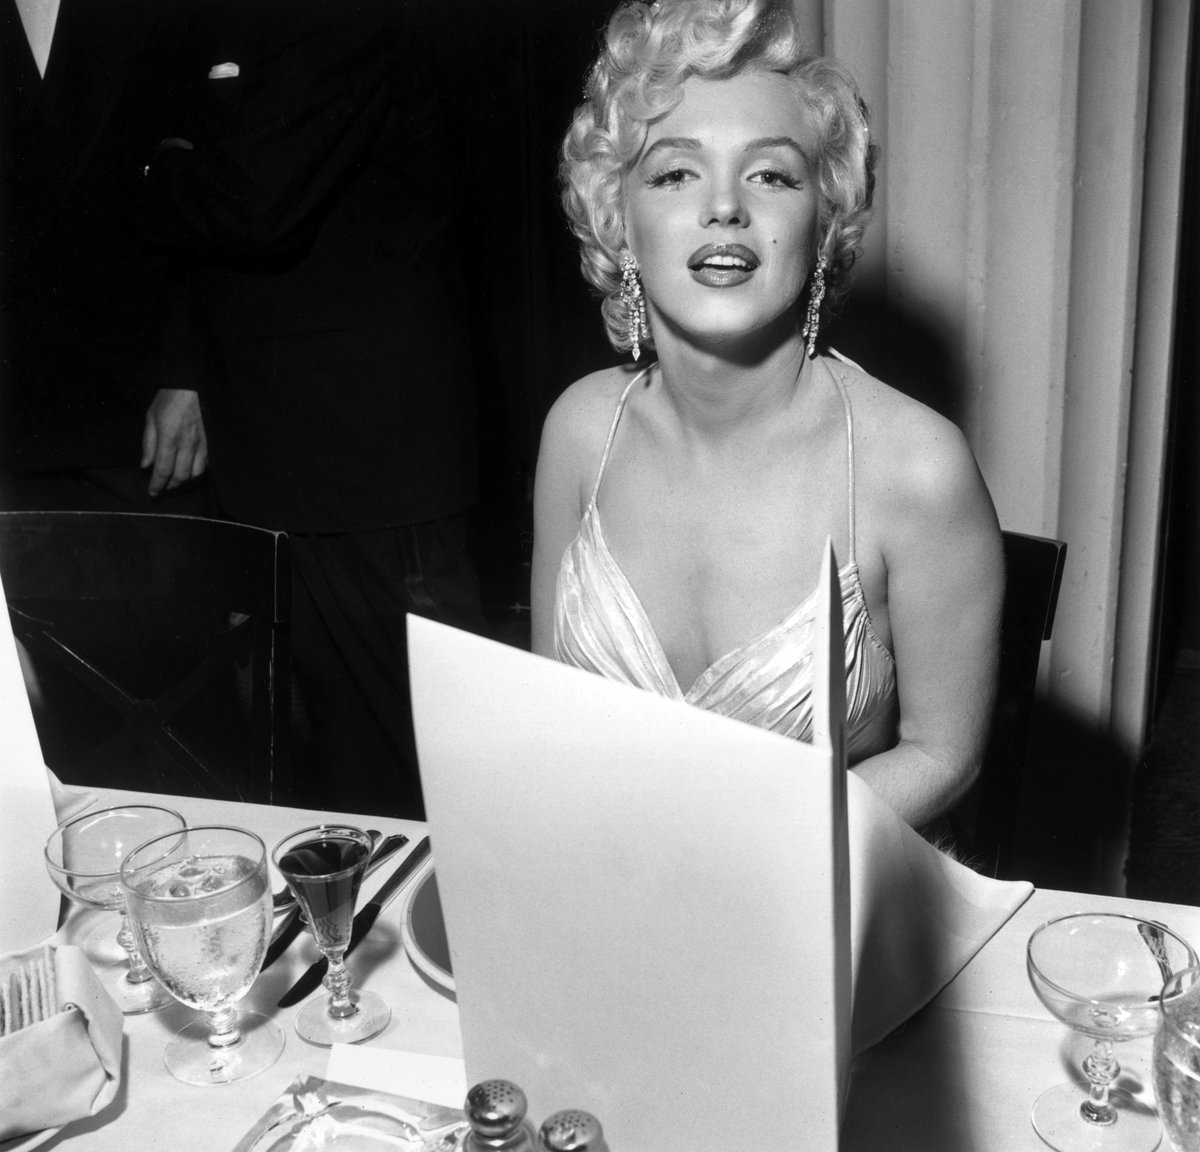 Marilyn Monroe at the 1954 Photoplay Awards where she won Best Actress for Gentlemen Prefer Blondes and How to Marry a Millionaire.